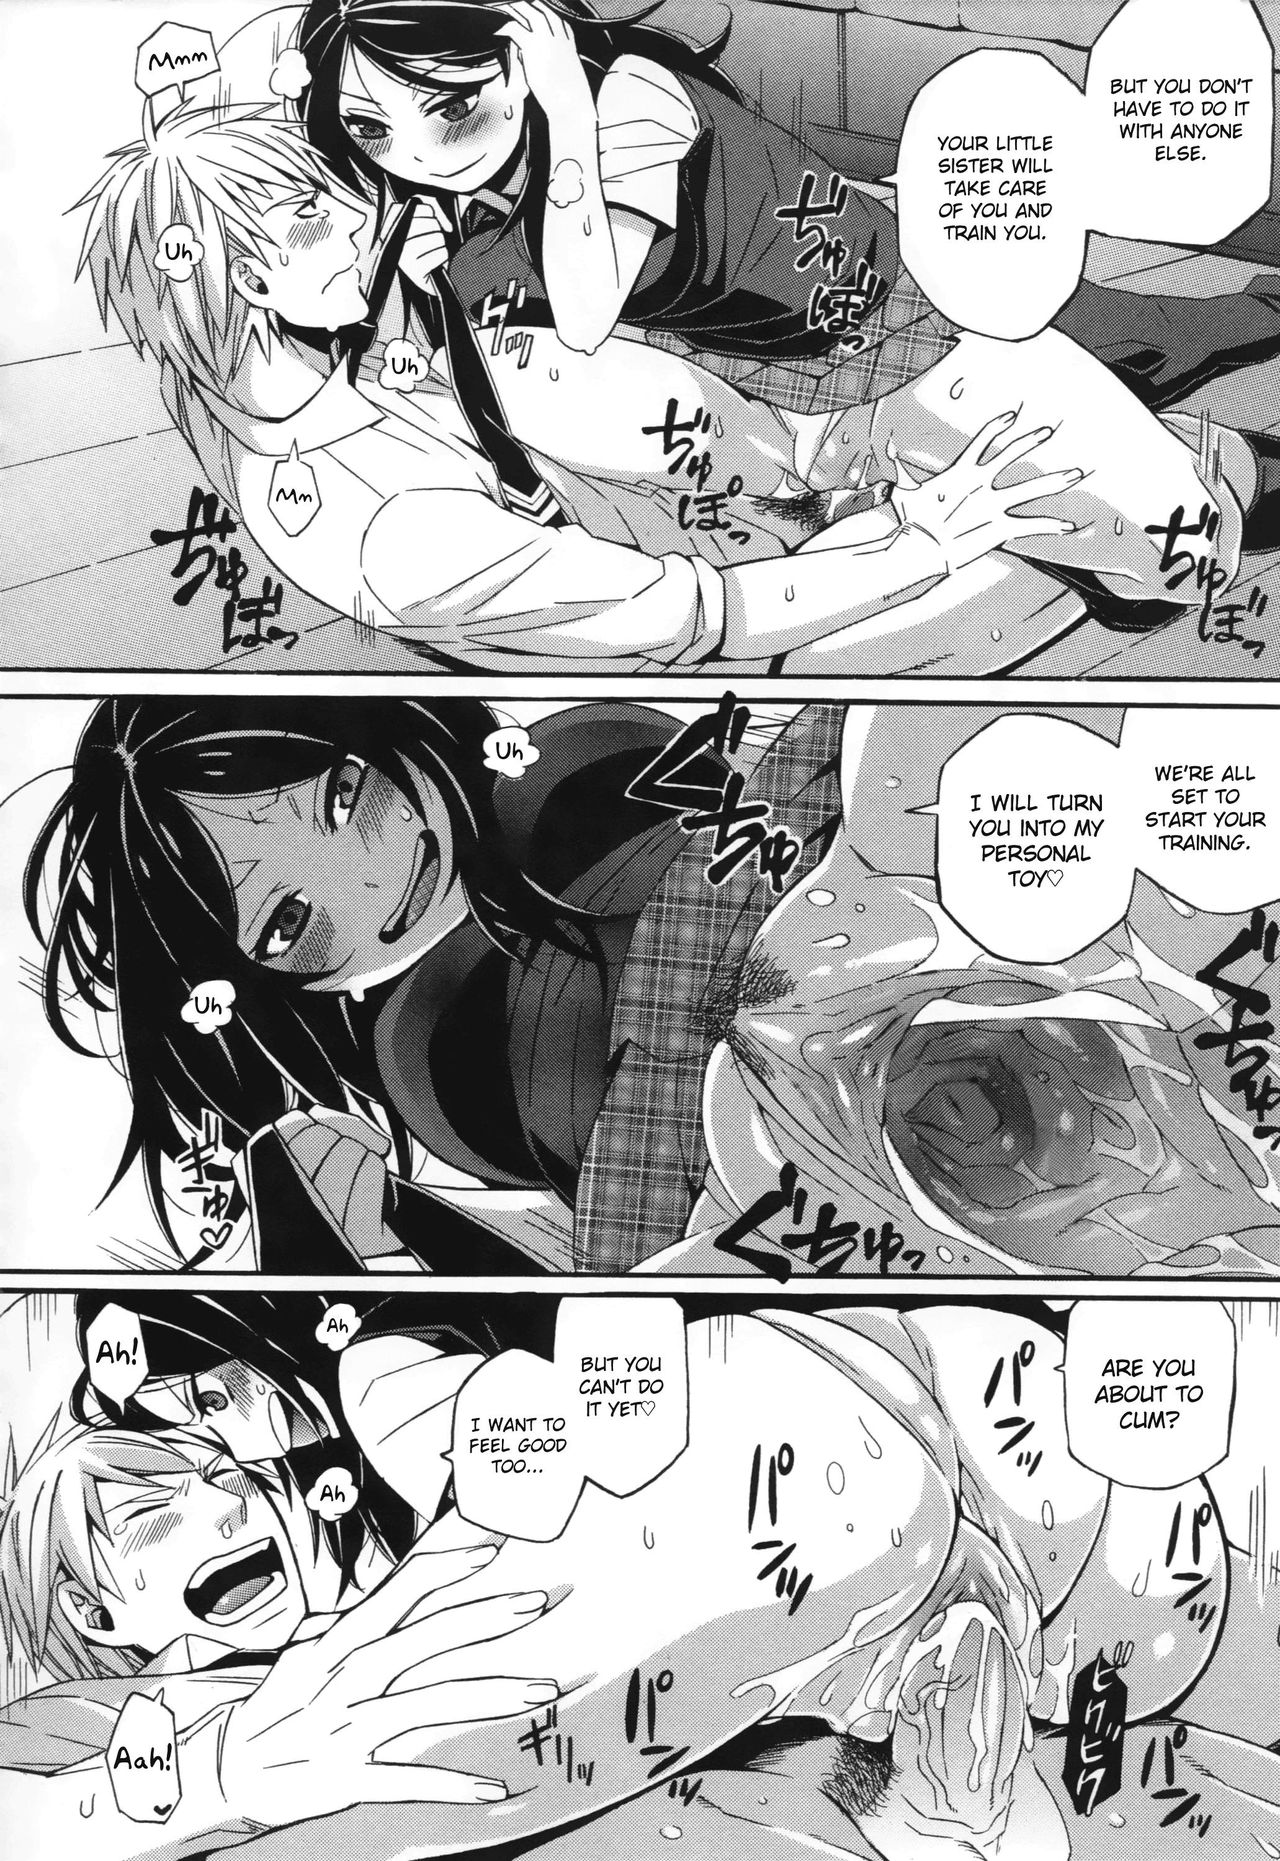 [Naokame] S&M ~Okuchi de Tokete Asoko de mo Tokeru~ | S&M ~Melts in Your Mouth and Between Your Legs~ (COMIC L.Q.M ~Little Queen Mount~ Vol. 1) [English] [MintVoid] [Decensored] [直かめ] S&M～お口で溶けてあそこでも溶ける～ (COMIC L.Q.M ～リトル クイン マウント～ vol.1) [英訳] [無修正]